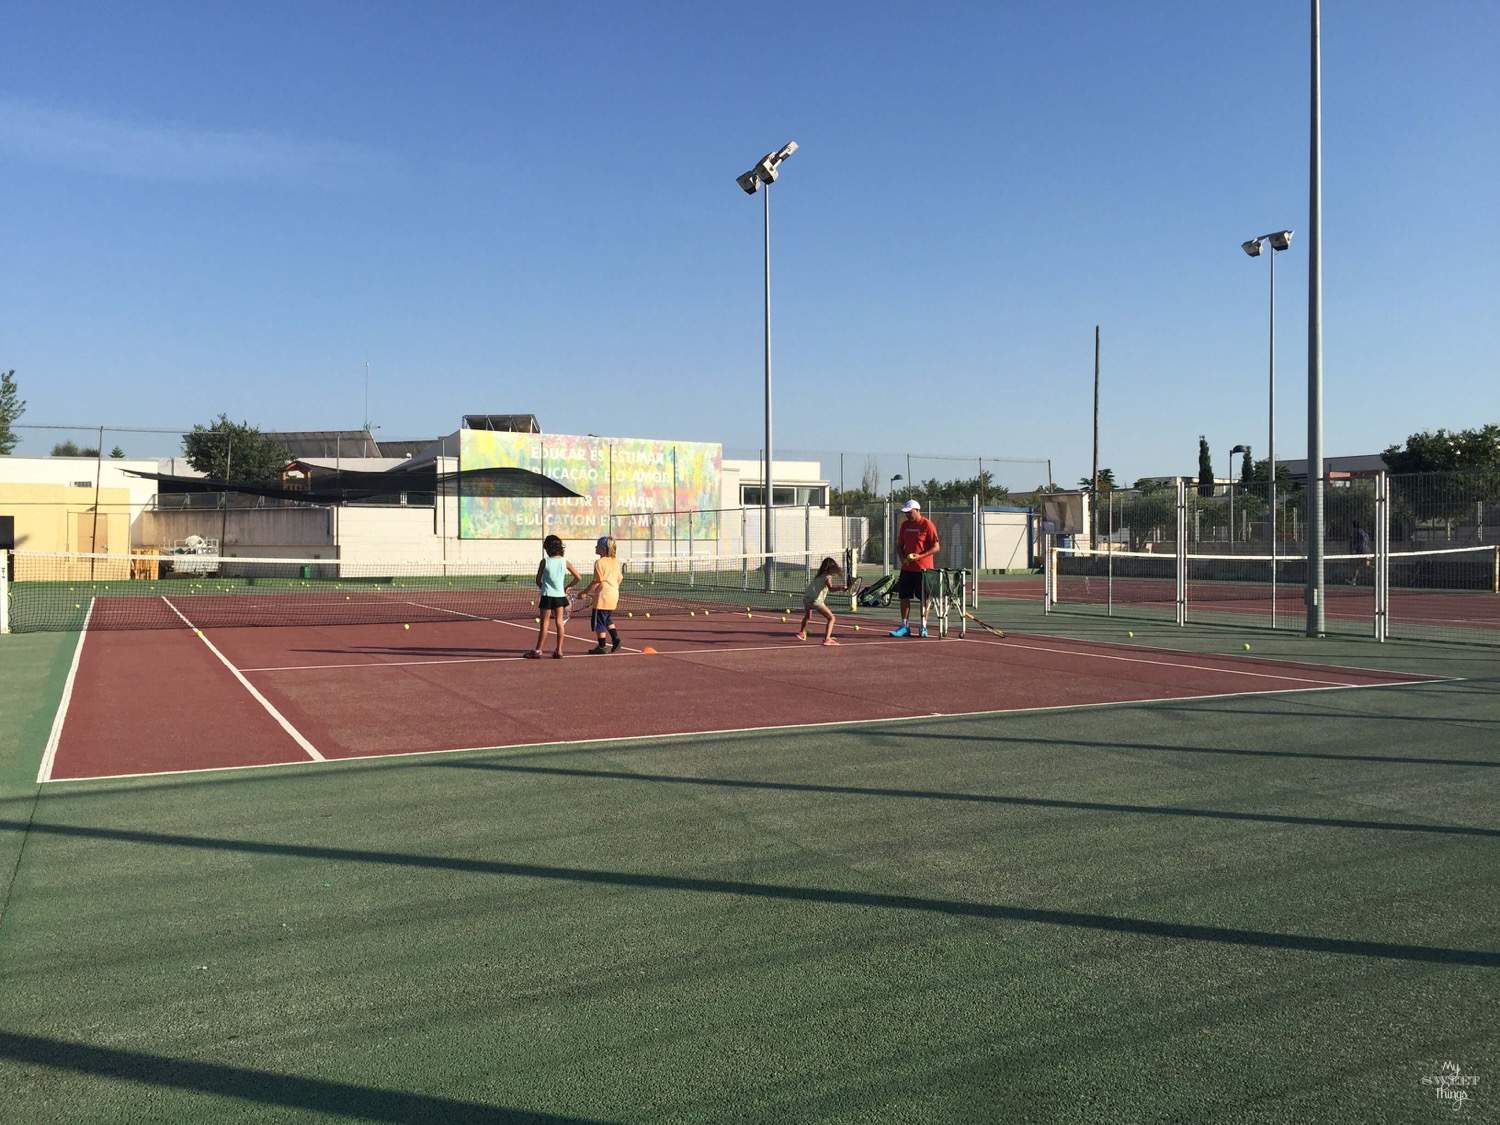 What to do in summer in Mallorca - Playing tennis